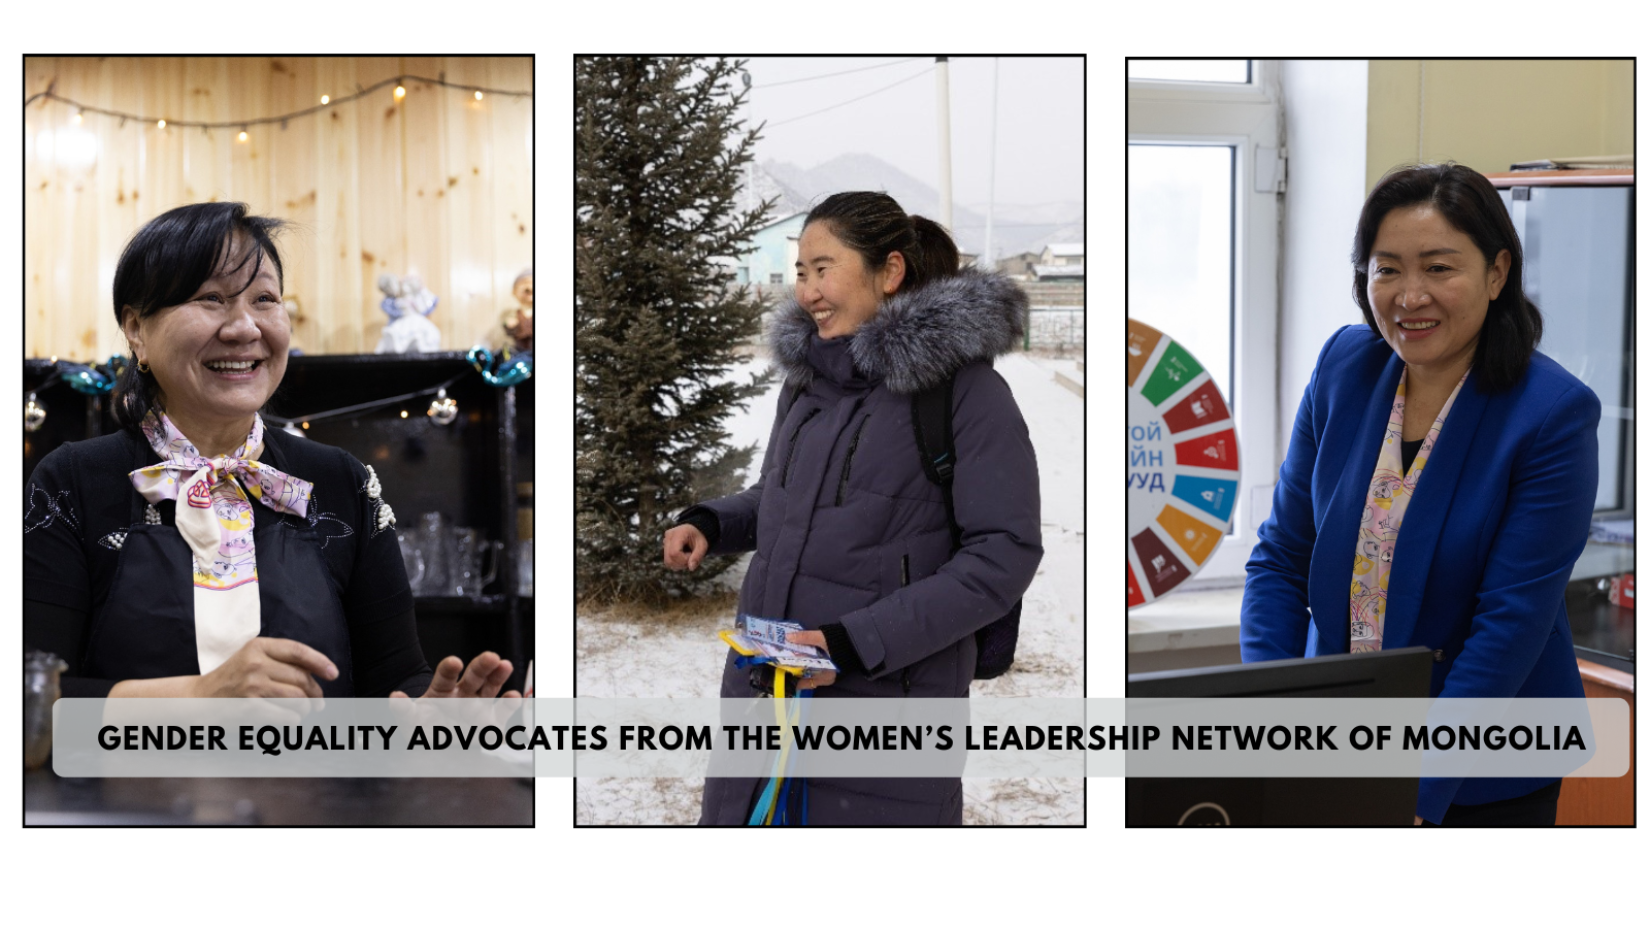 Gender advocates from the Women leadership Network